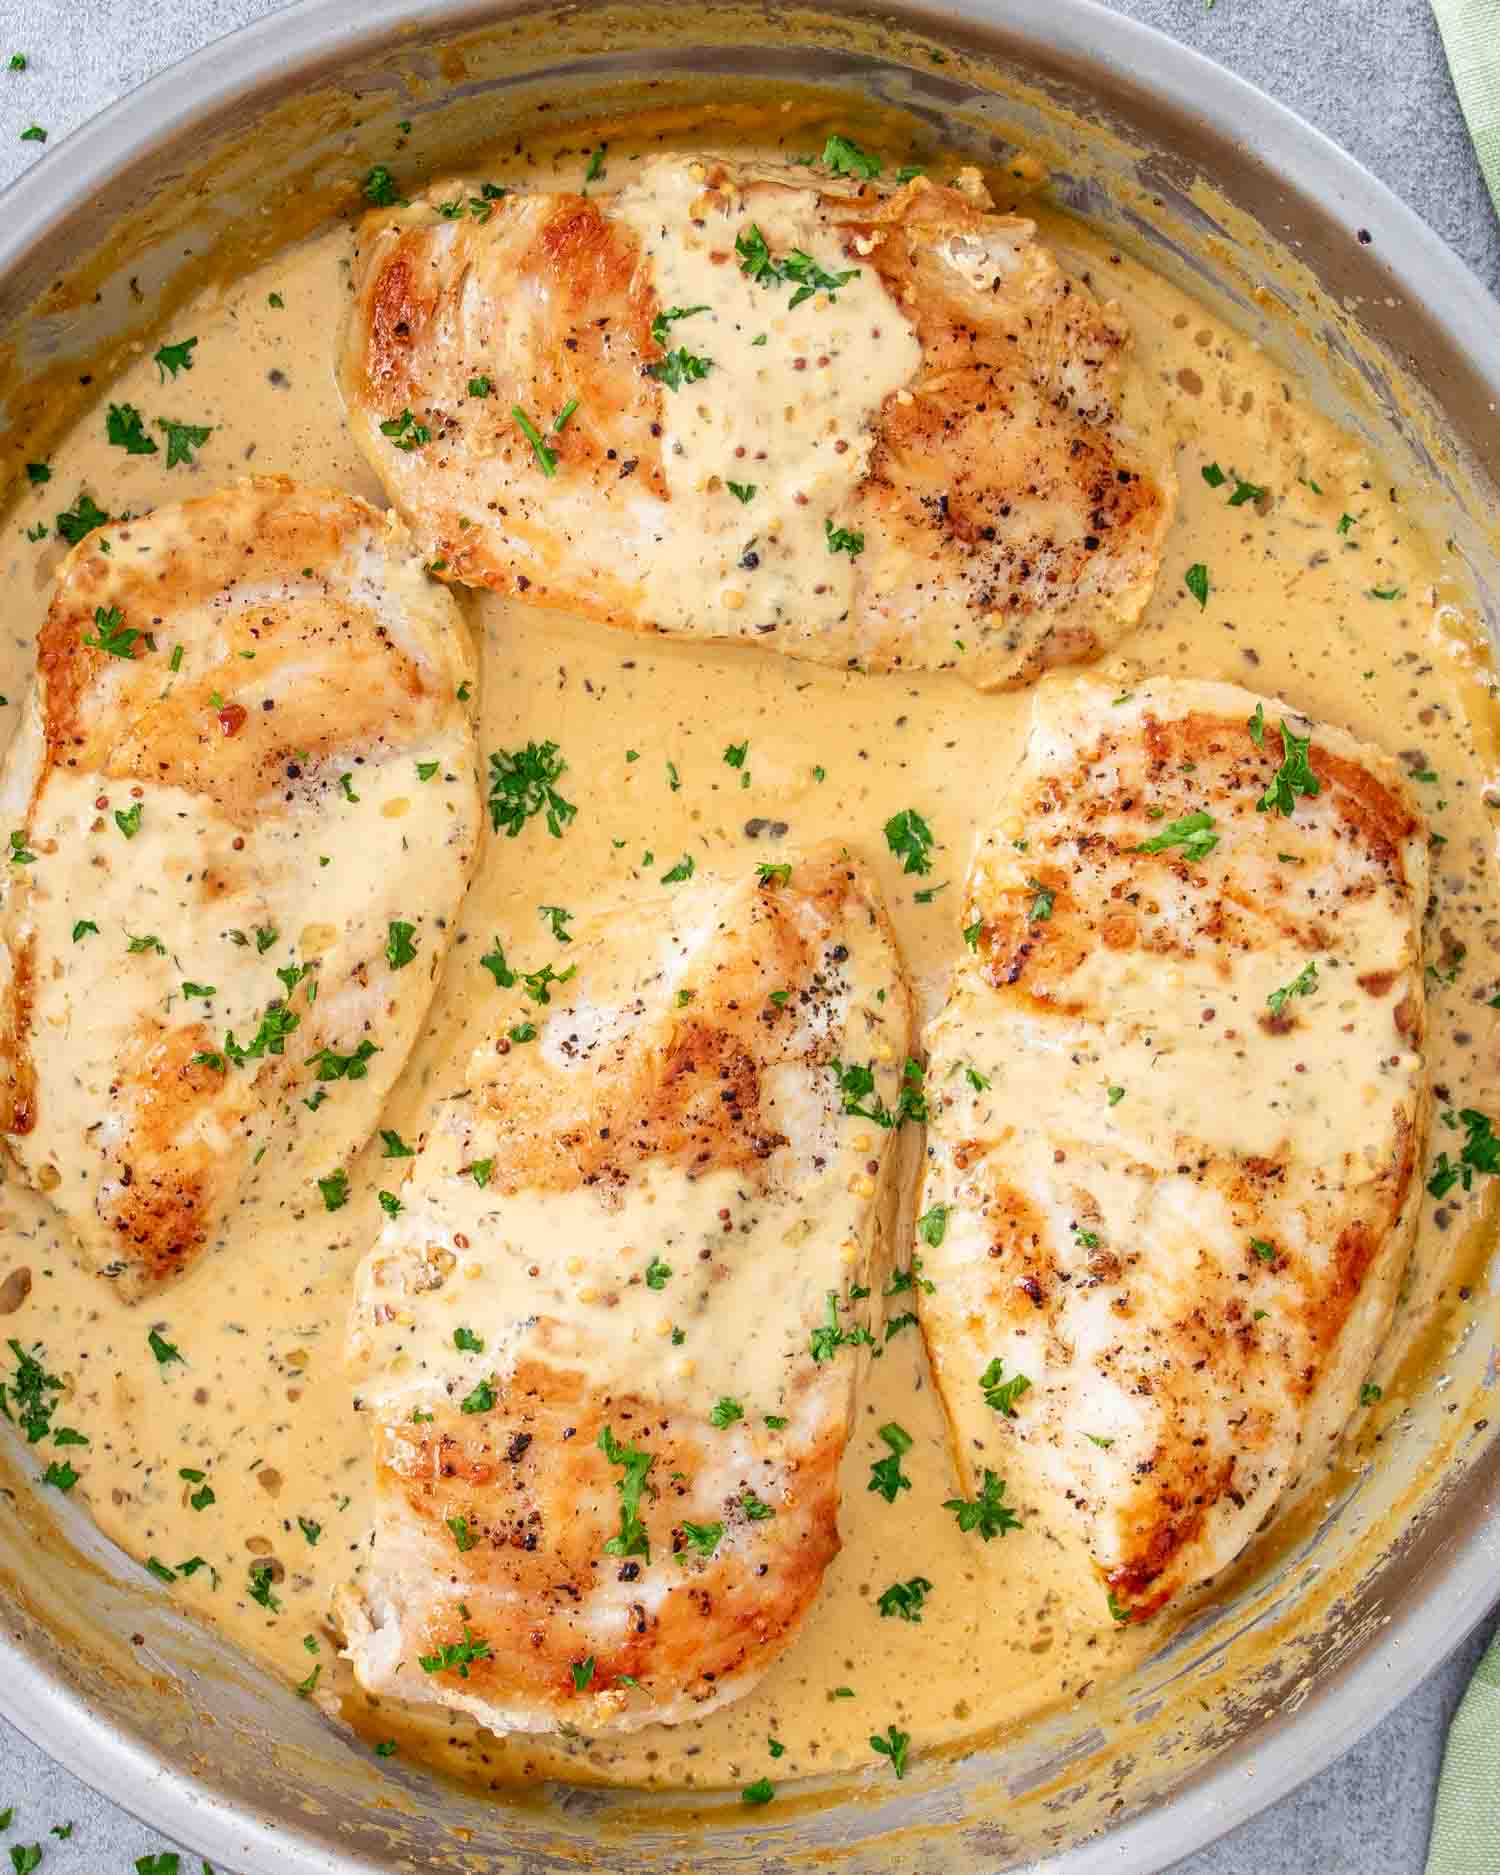 freshly made creamy mustard chicken in a skillet garnished with parsley.